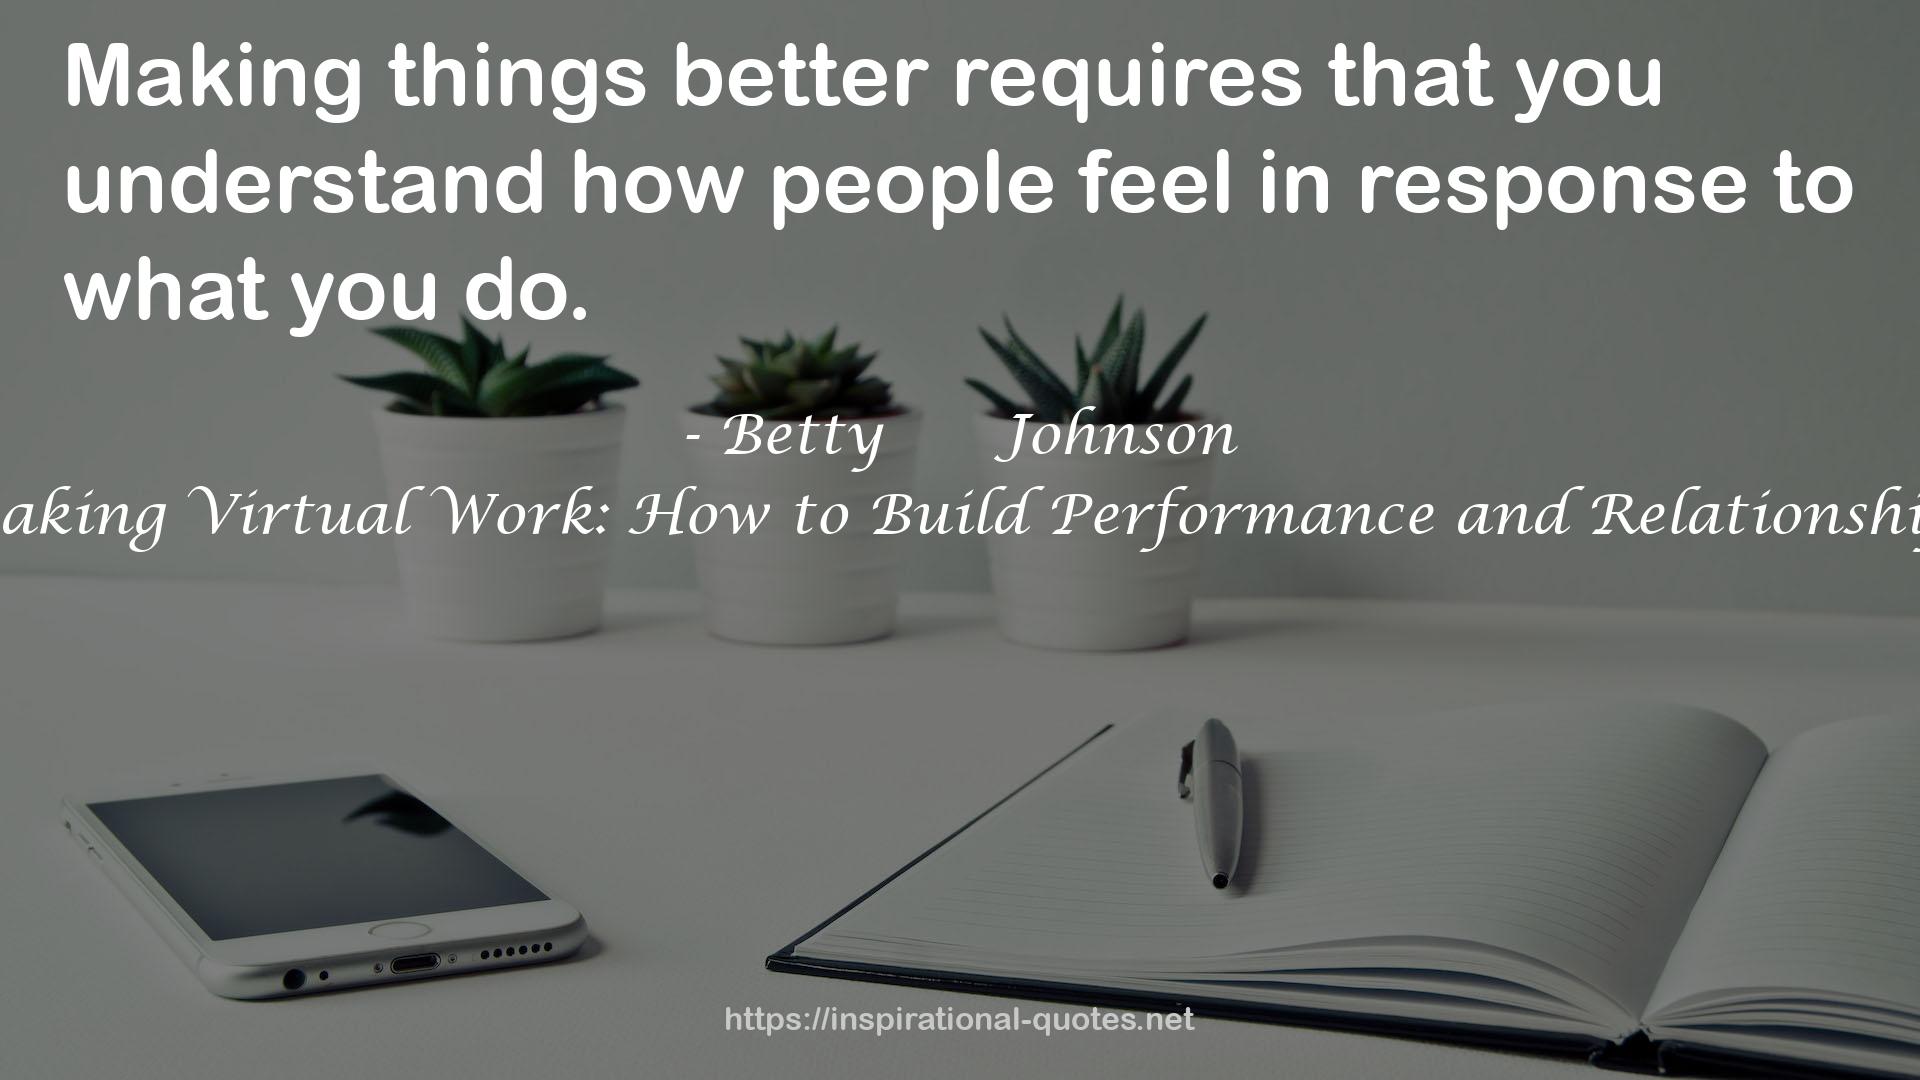 Making Virtual Work: How to Build Performance and Relationships QUOTES